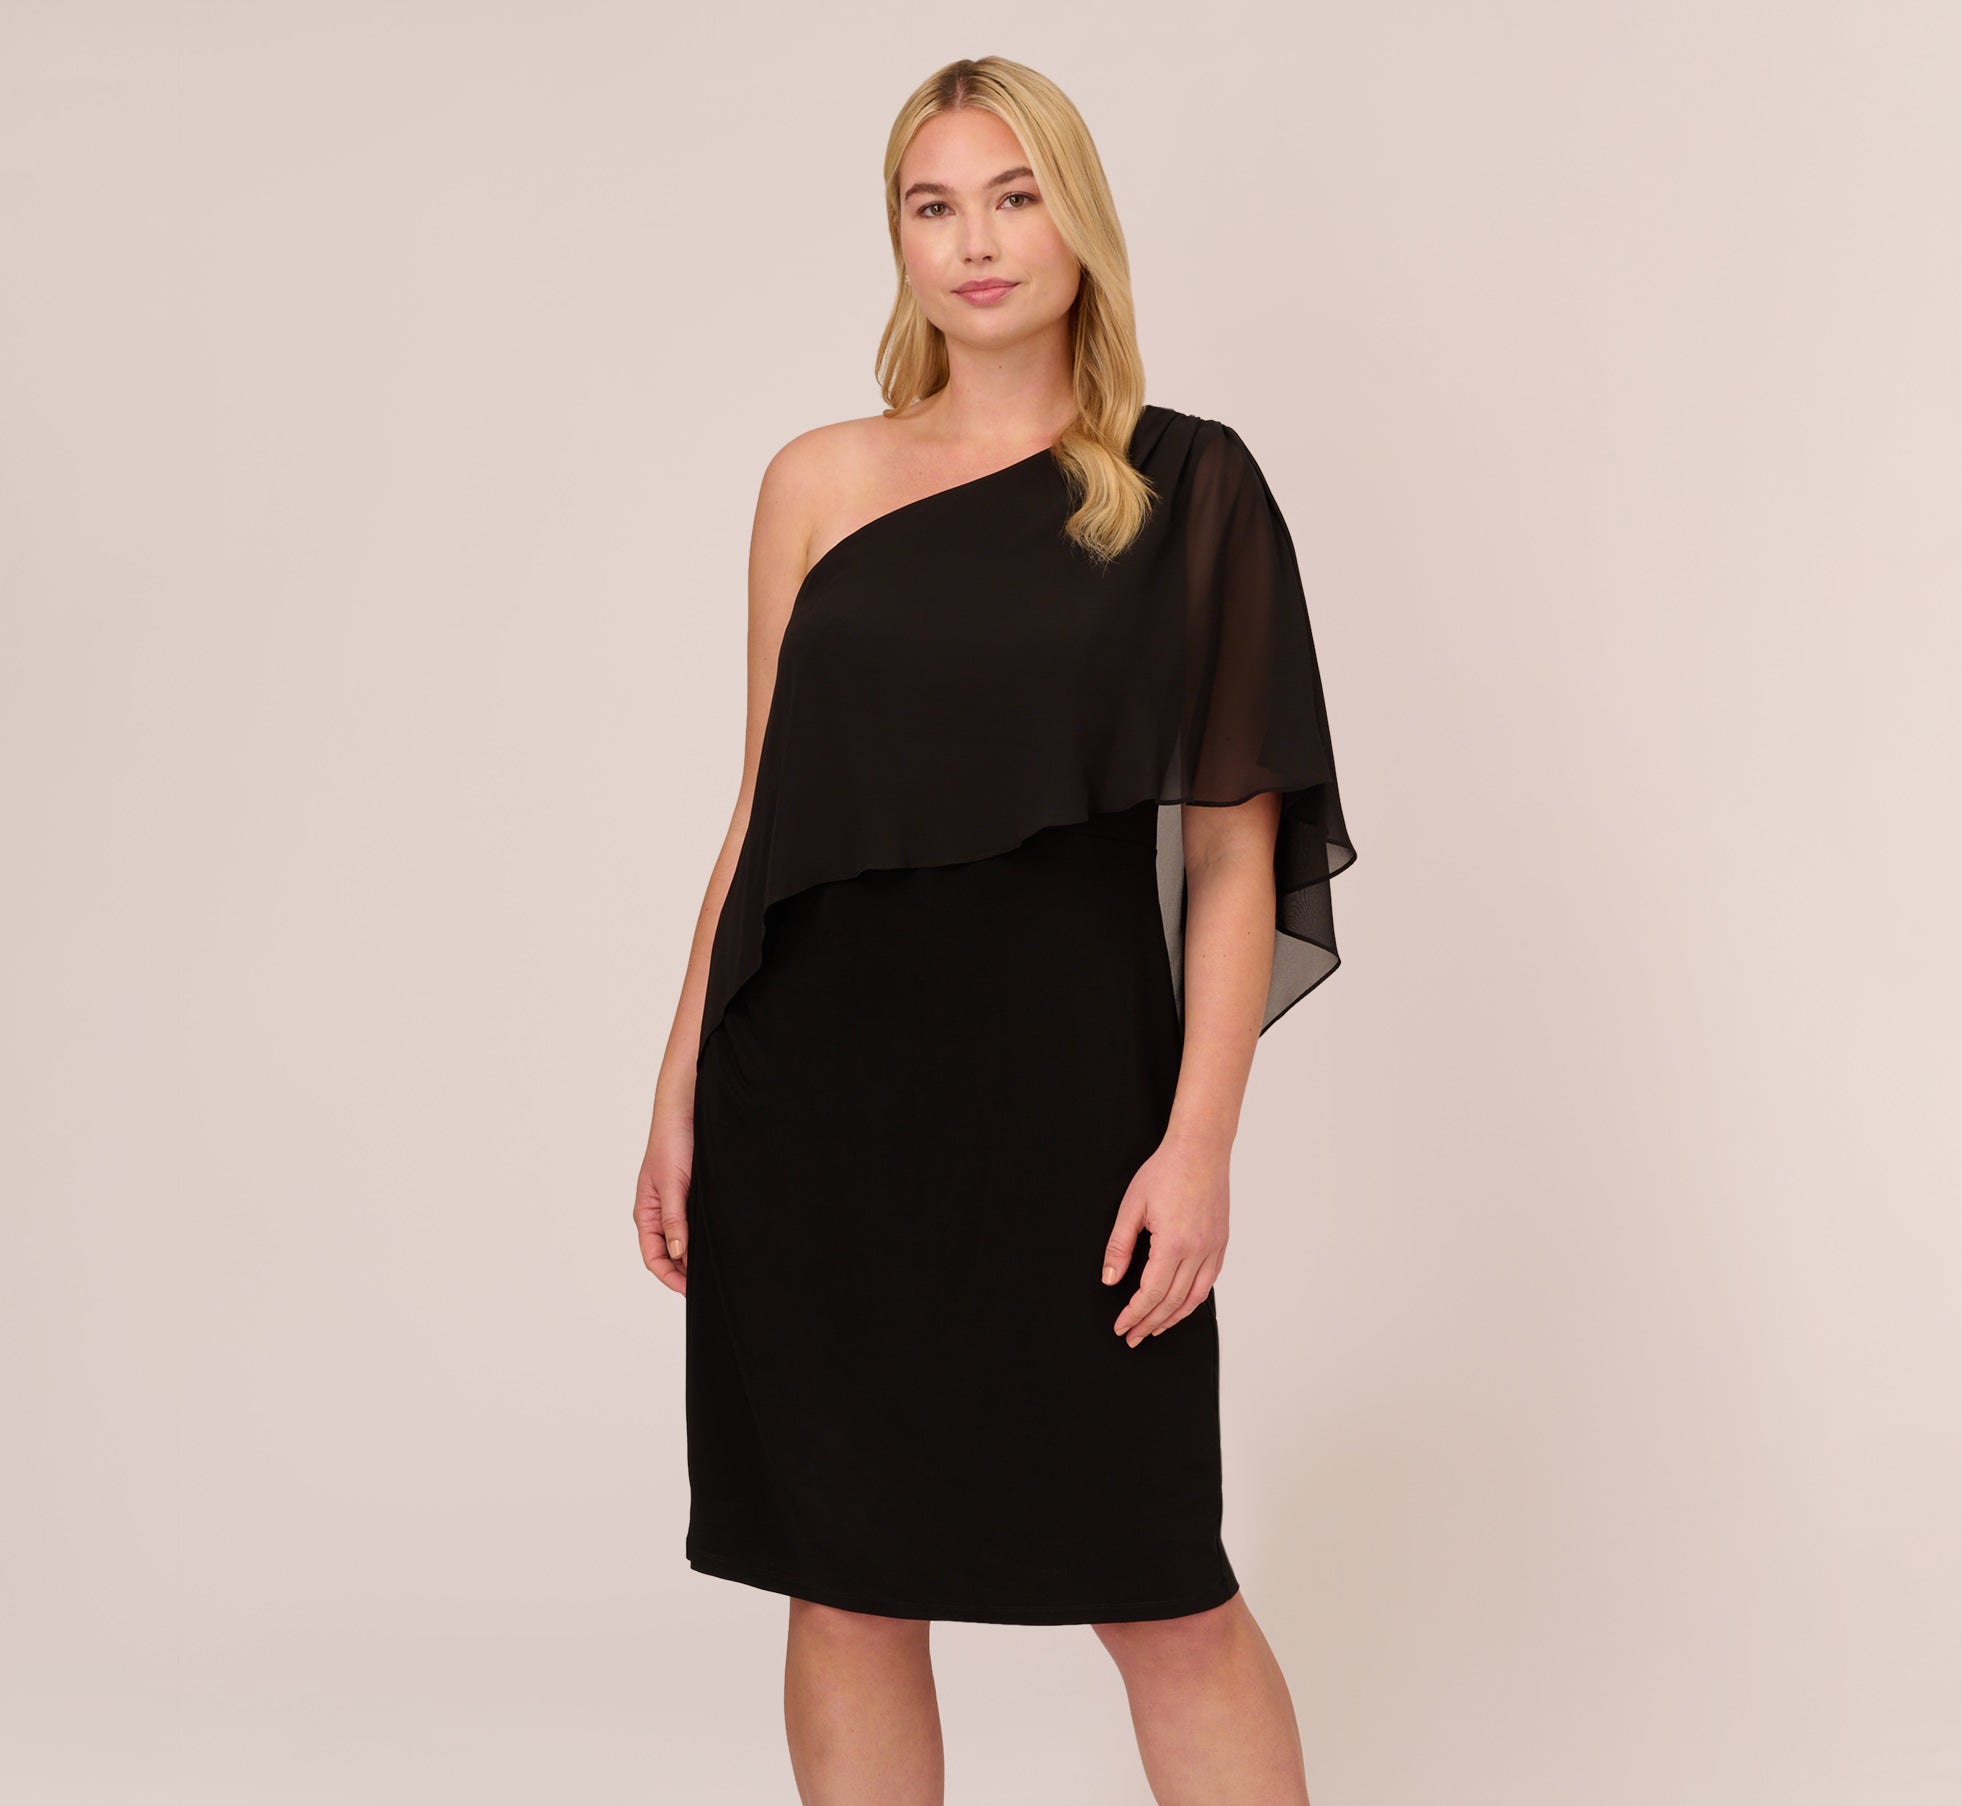 Plus Size One Shoulder Dress With Chiffon Cape In Black